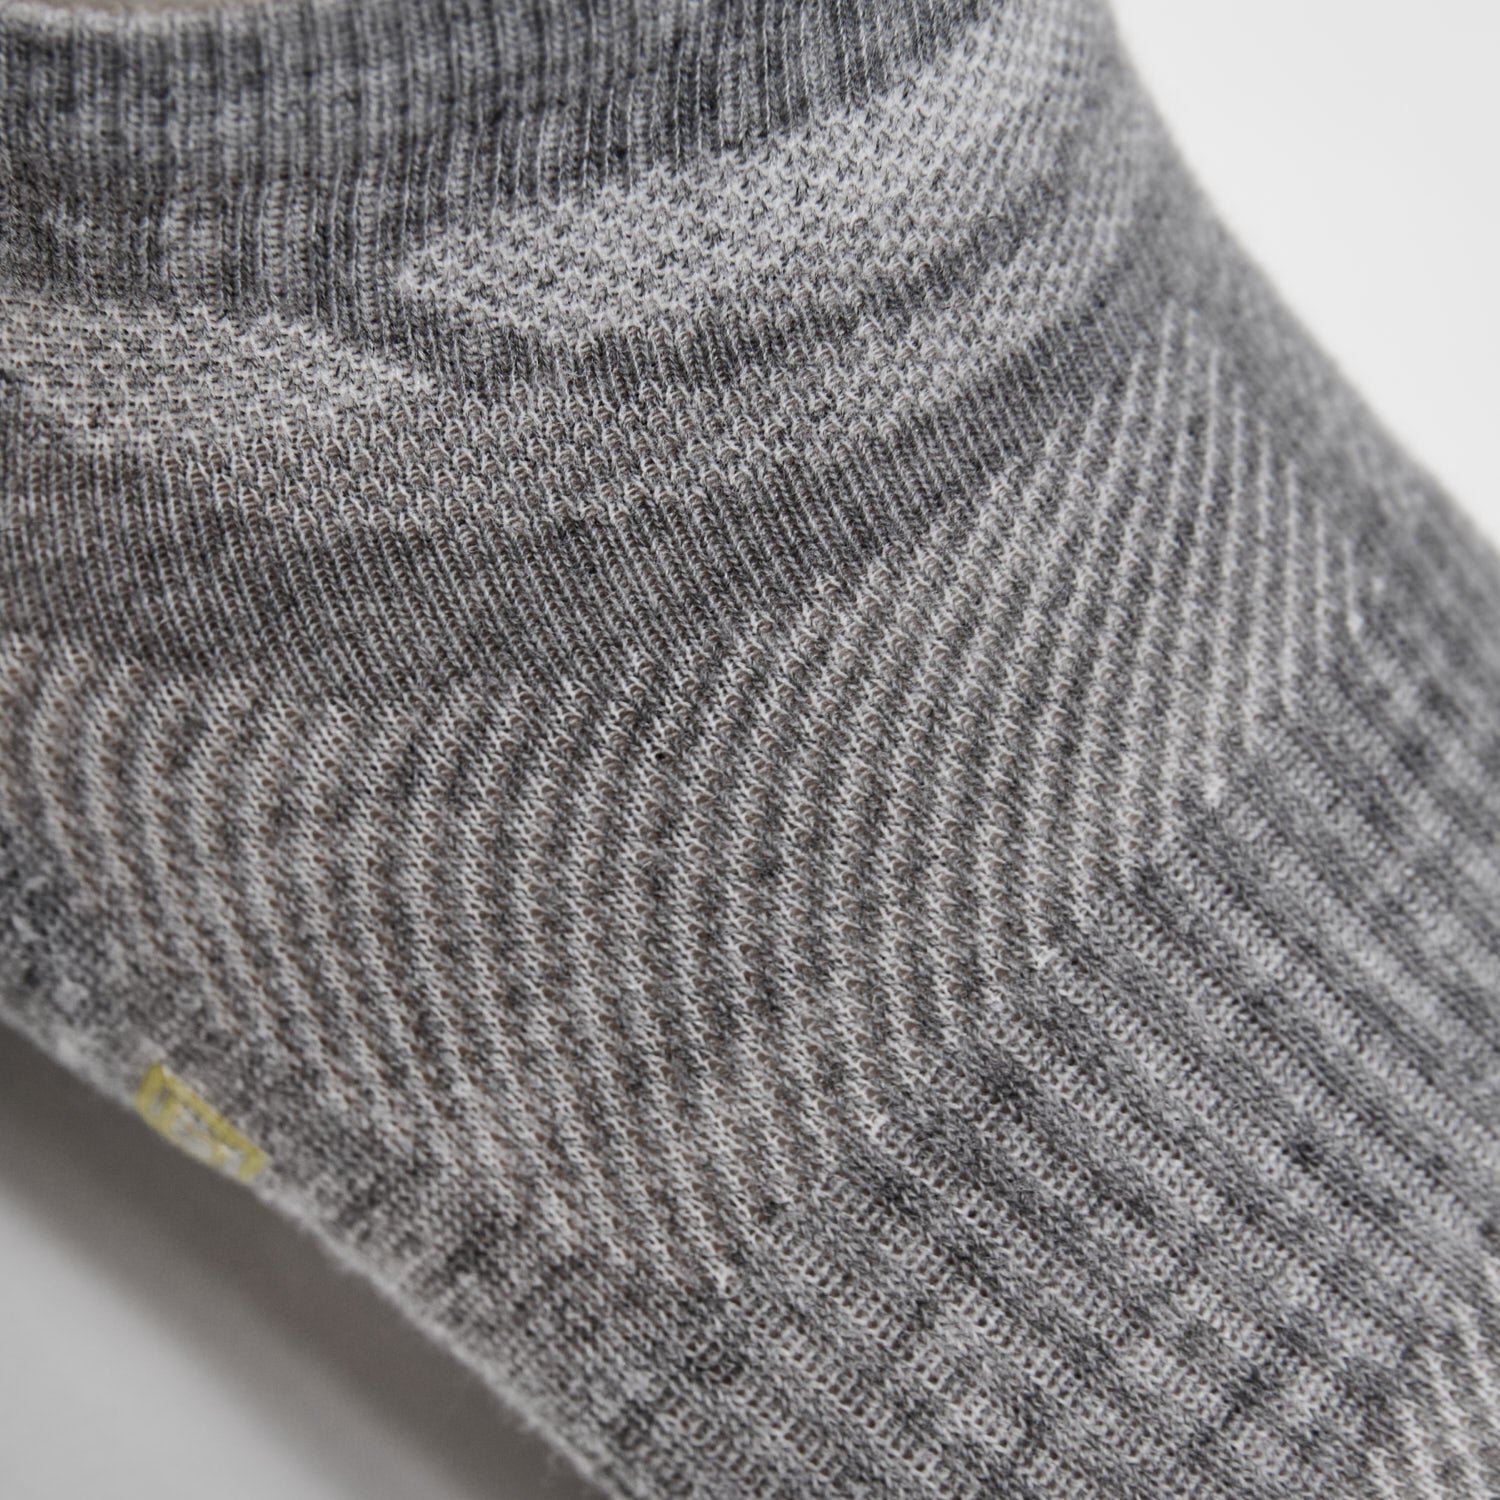 Heather Gray Ankle Socks 6-Pack